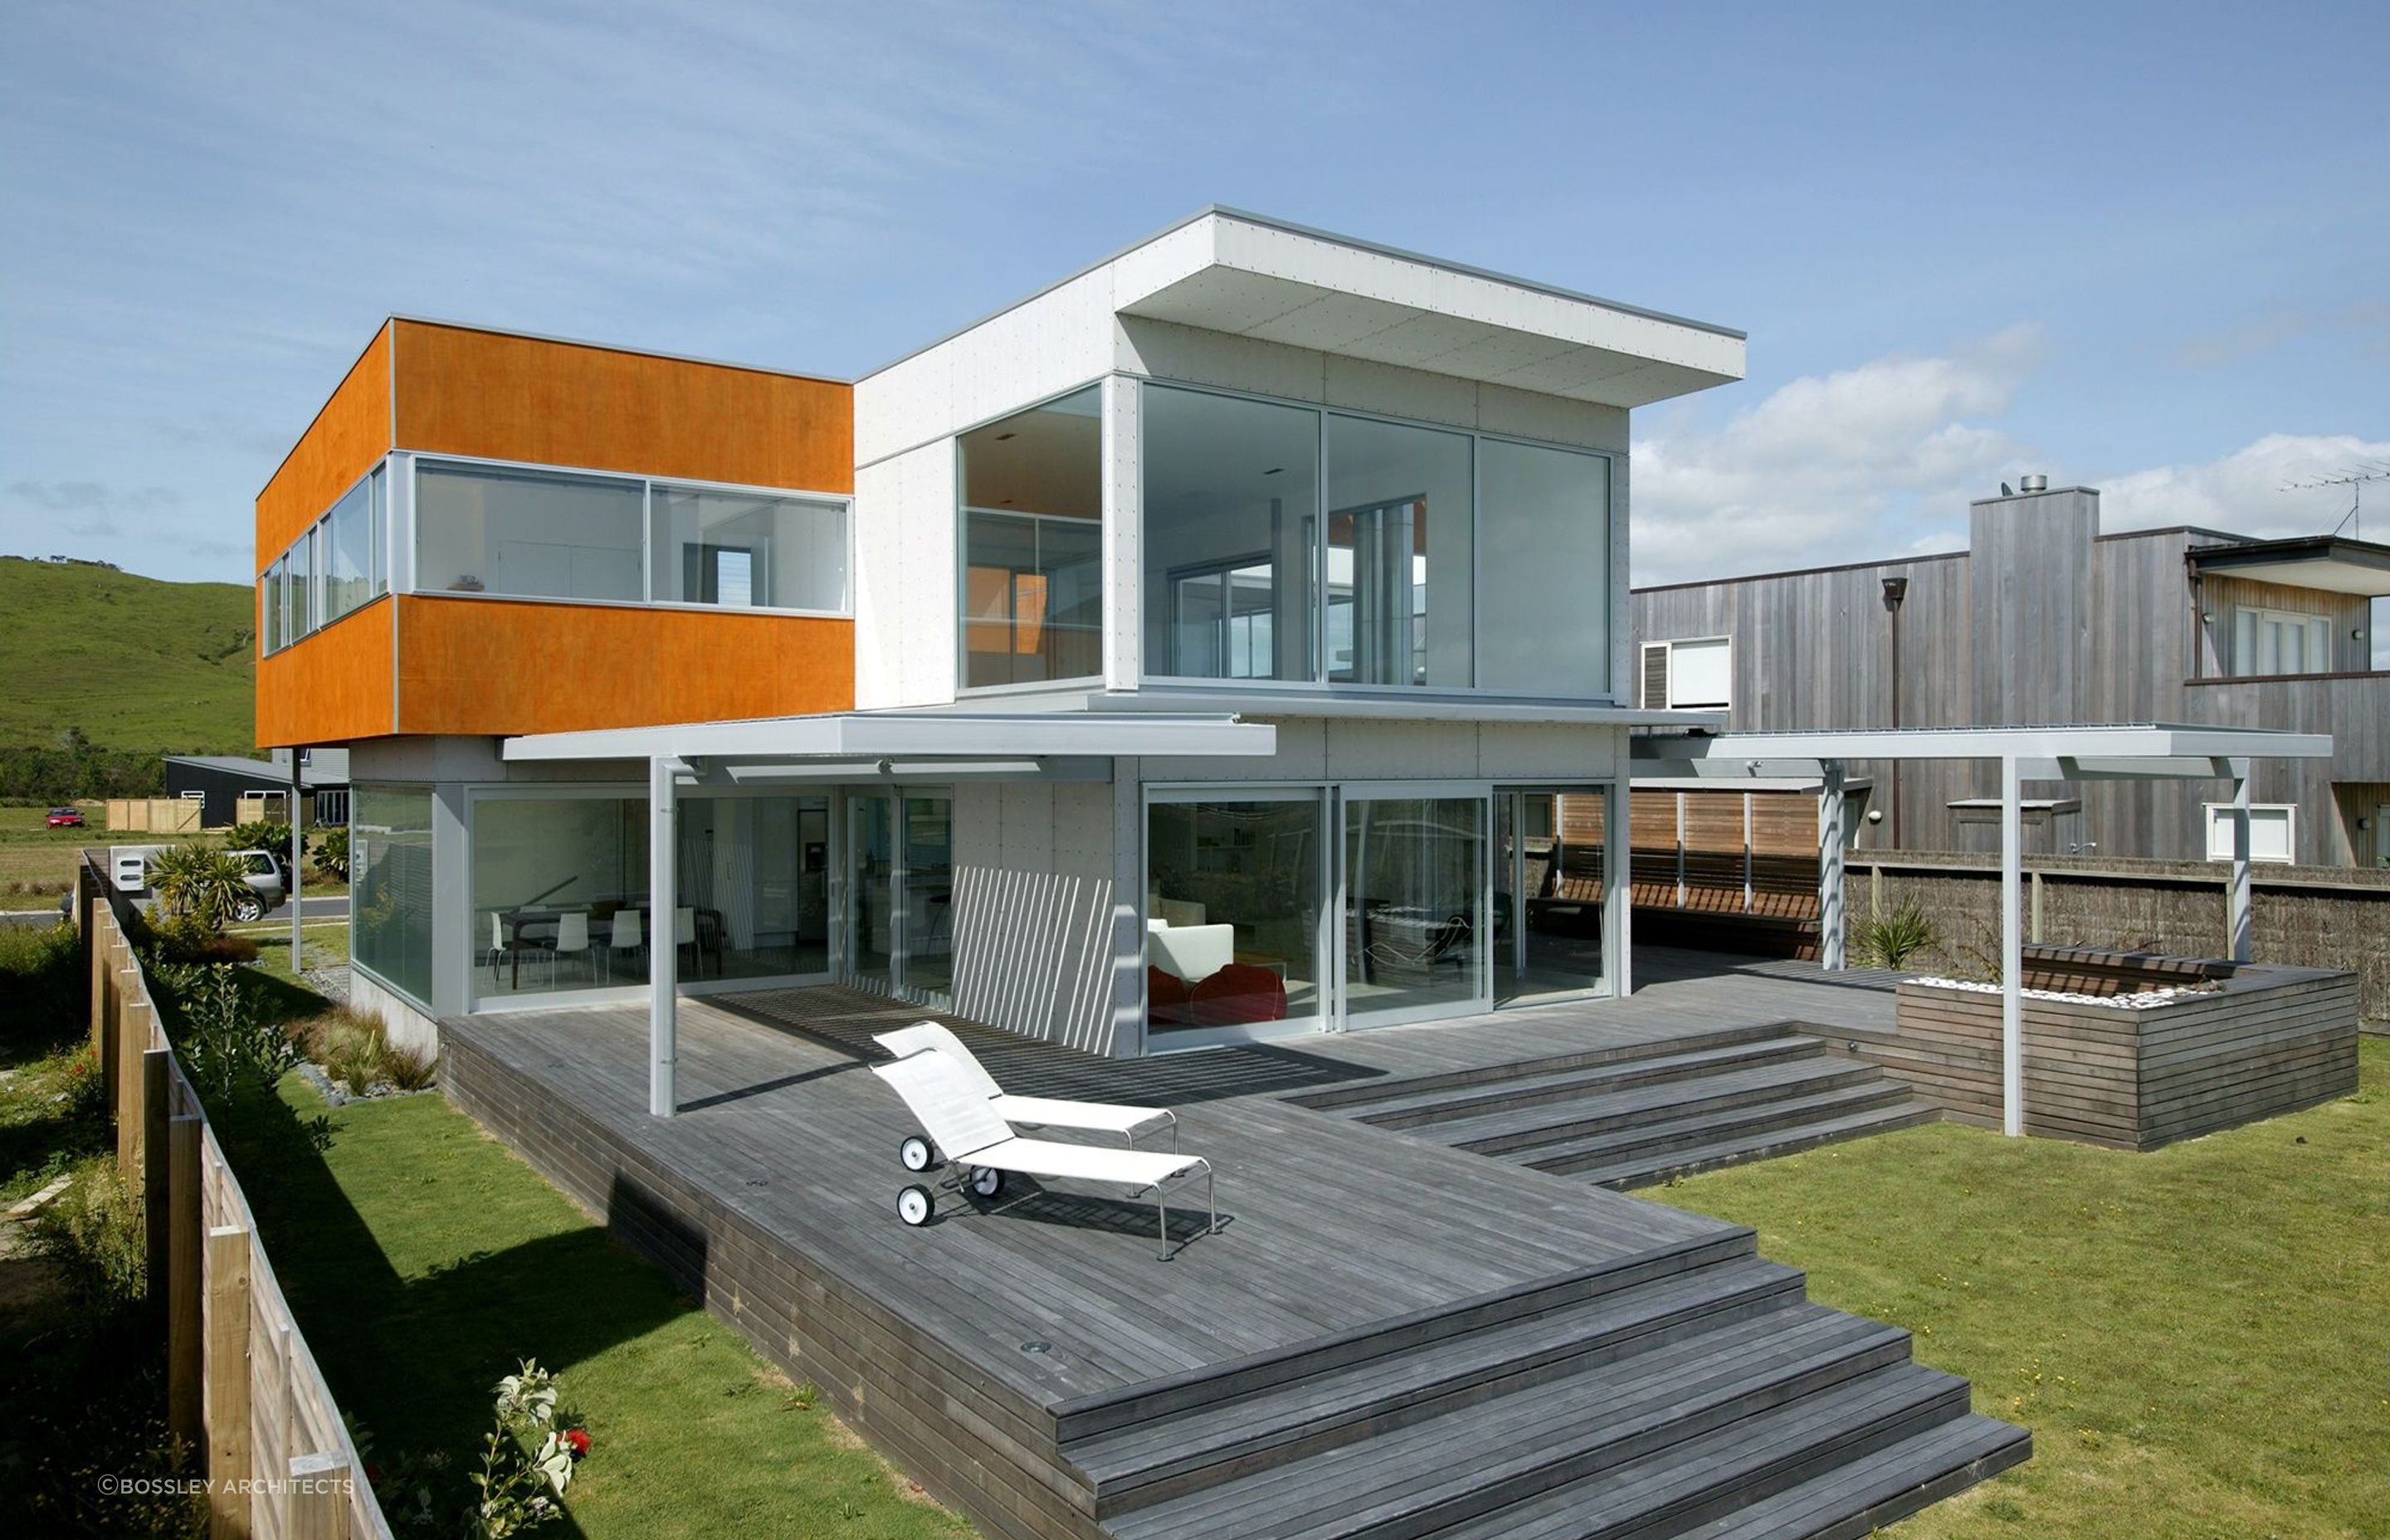 The back of the house reveals a large and accommodating outdoor living space.